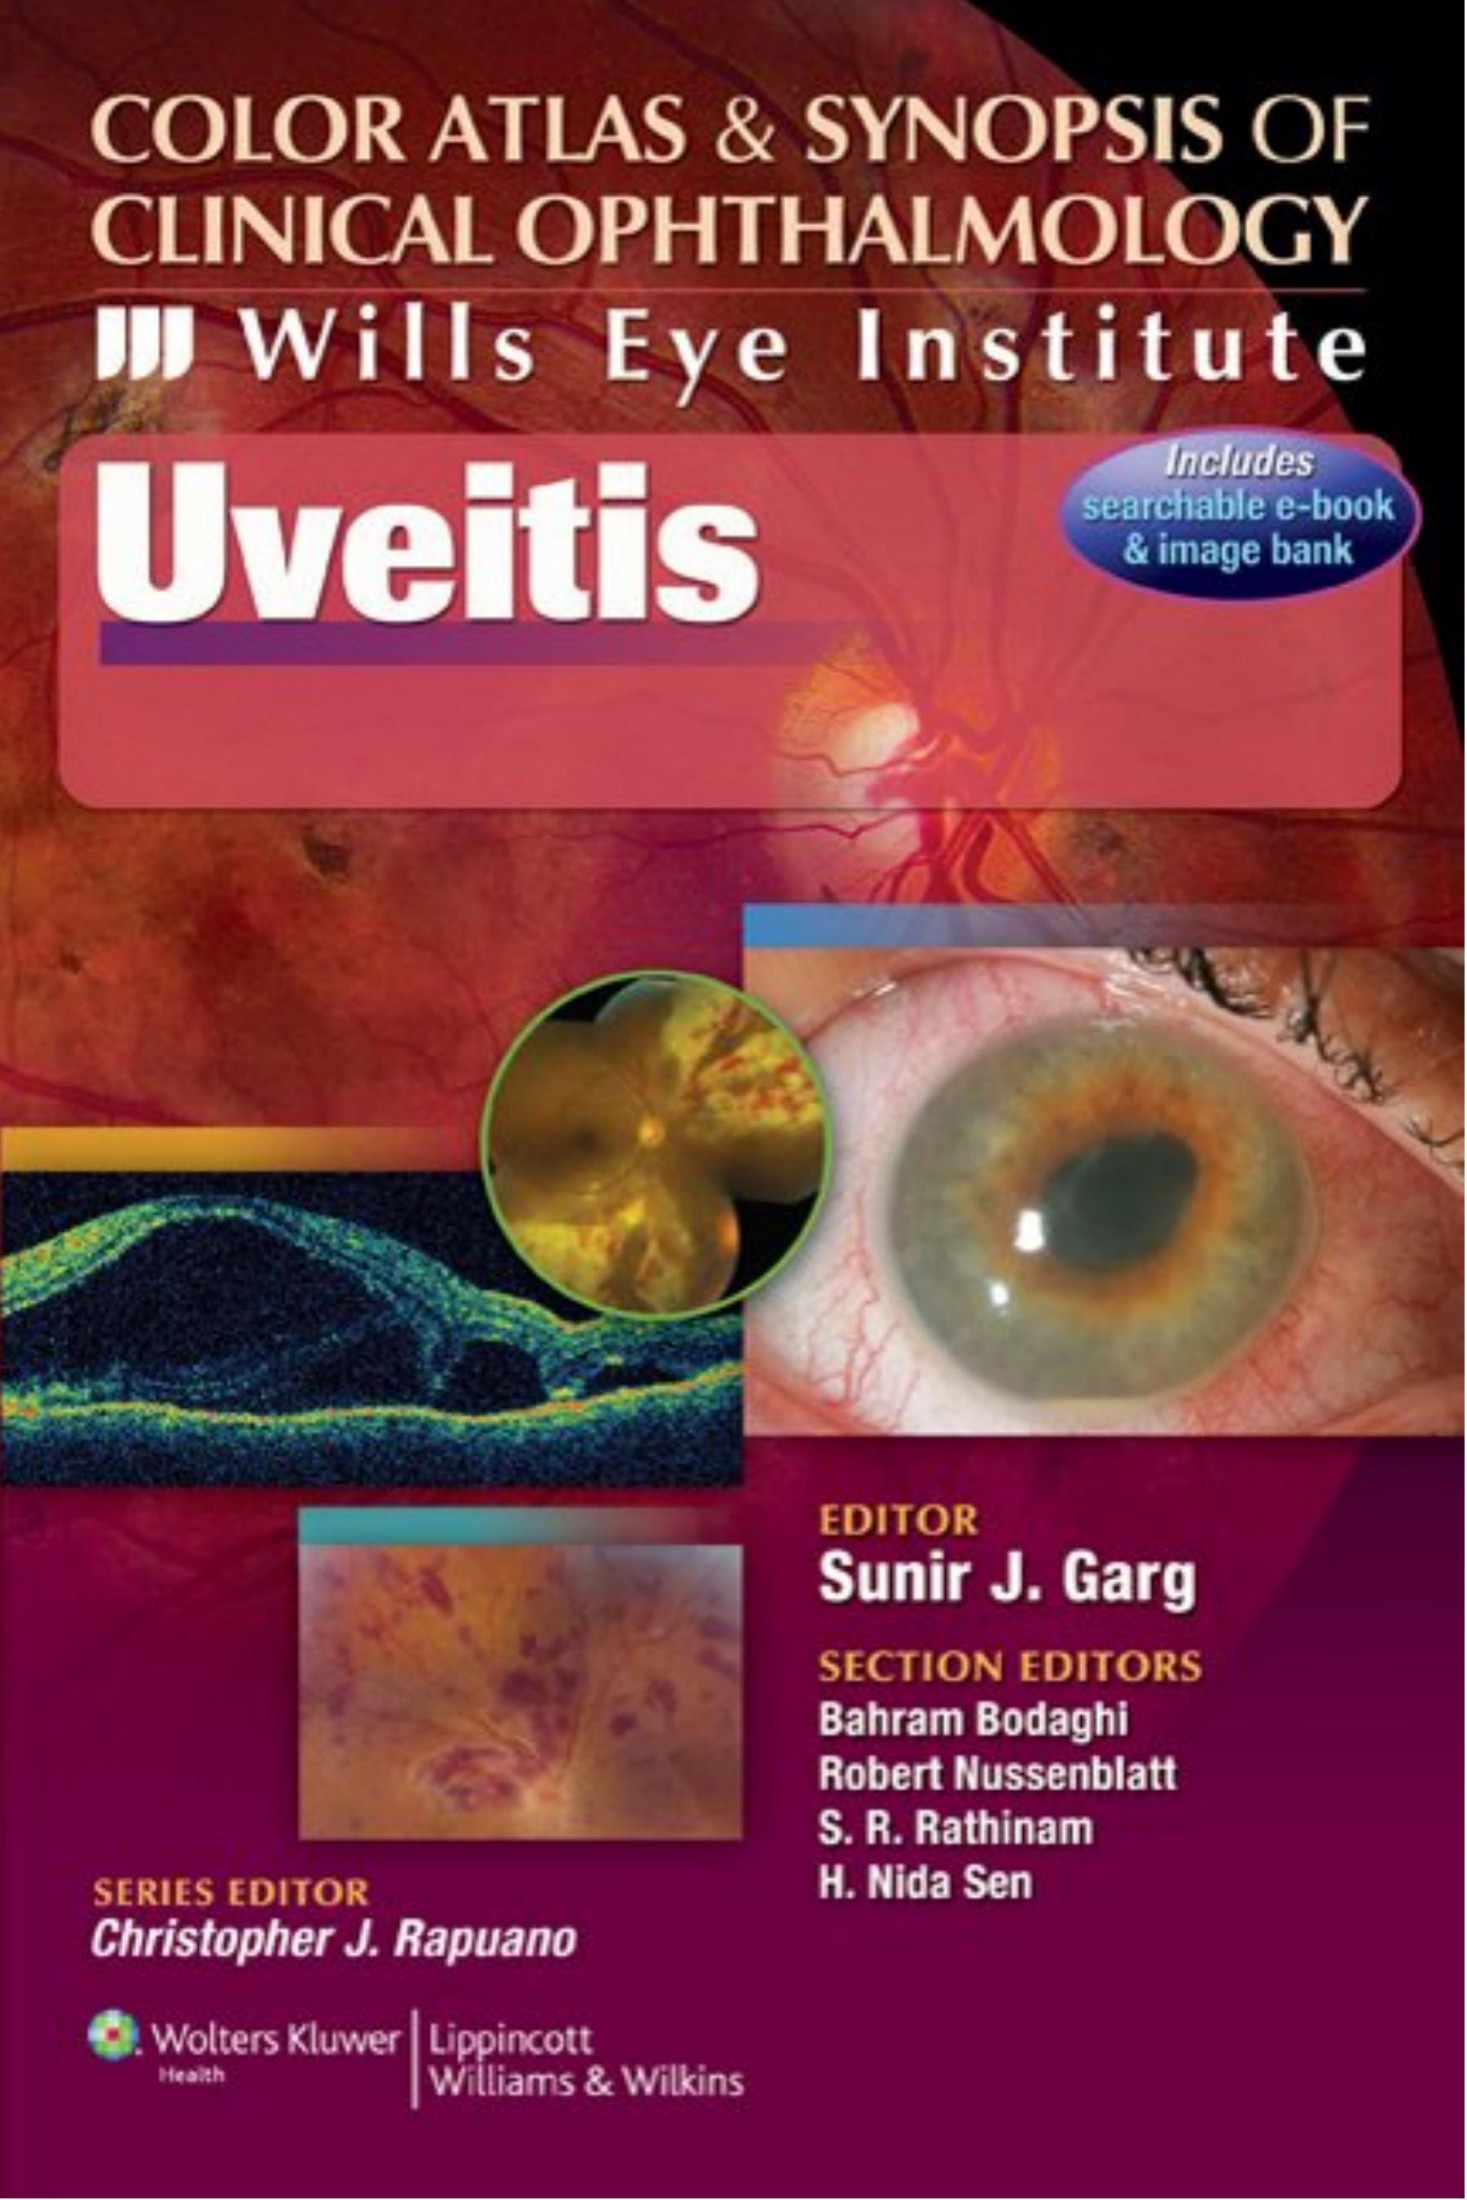 Color Atlas & Synopsis of Clinical Ophthalmology - Wills Eye Institute Uveitis-